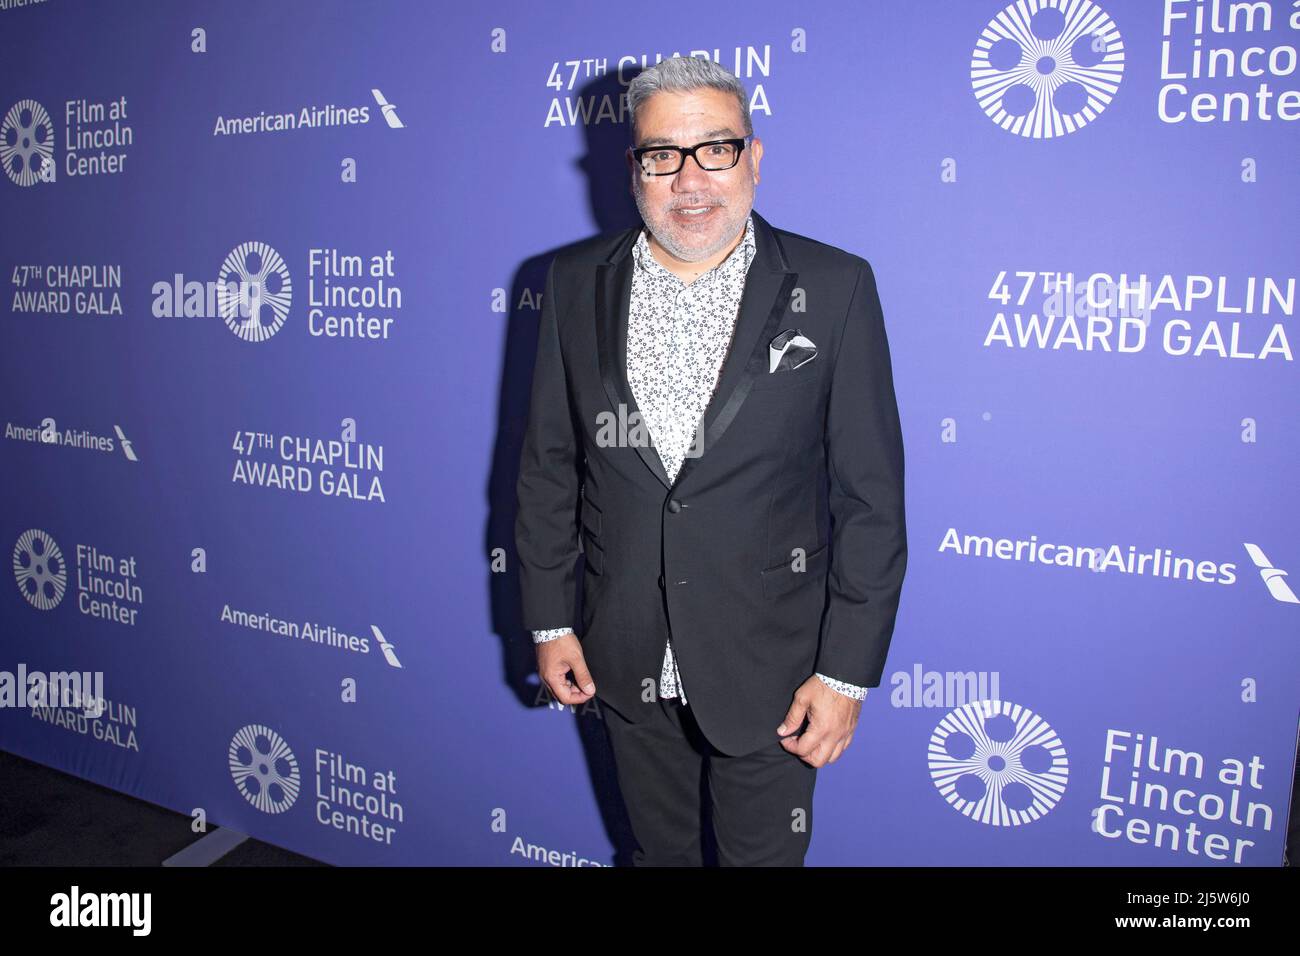 New York, United States. 25th Apr, 2022. Senior Vice President of FLC and Executive Director of the New York Film Festival Eugene Hernandez attends the 47th Chaplin Award Gala honoring Cate Blanchett at Alice Tully Hall, Lincoln Center in New York City. Credit: SOPA Images Limited/Alamy Live News Stock Photo